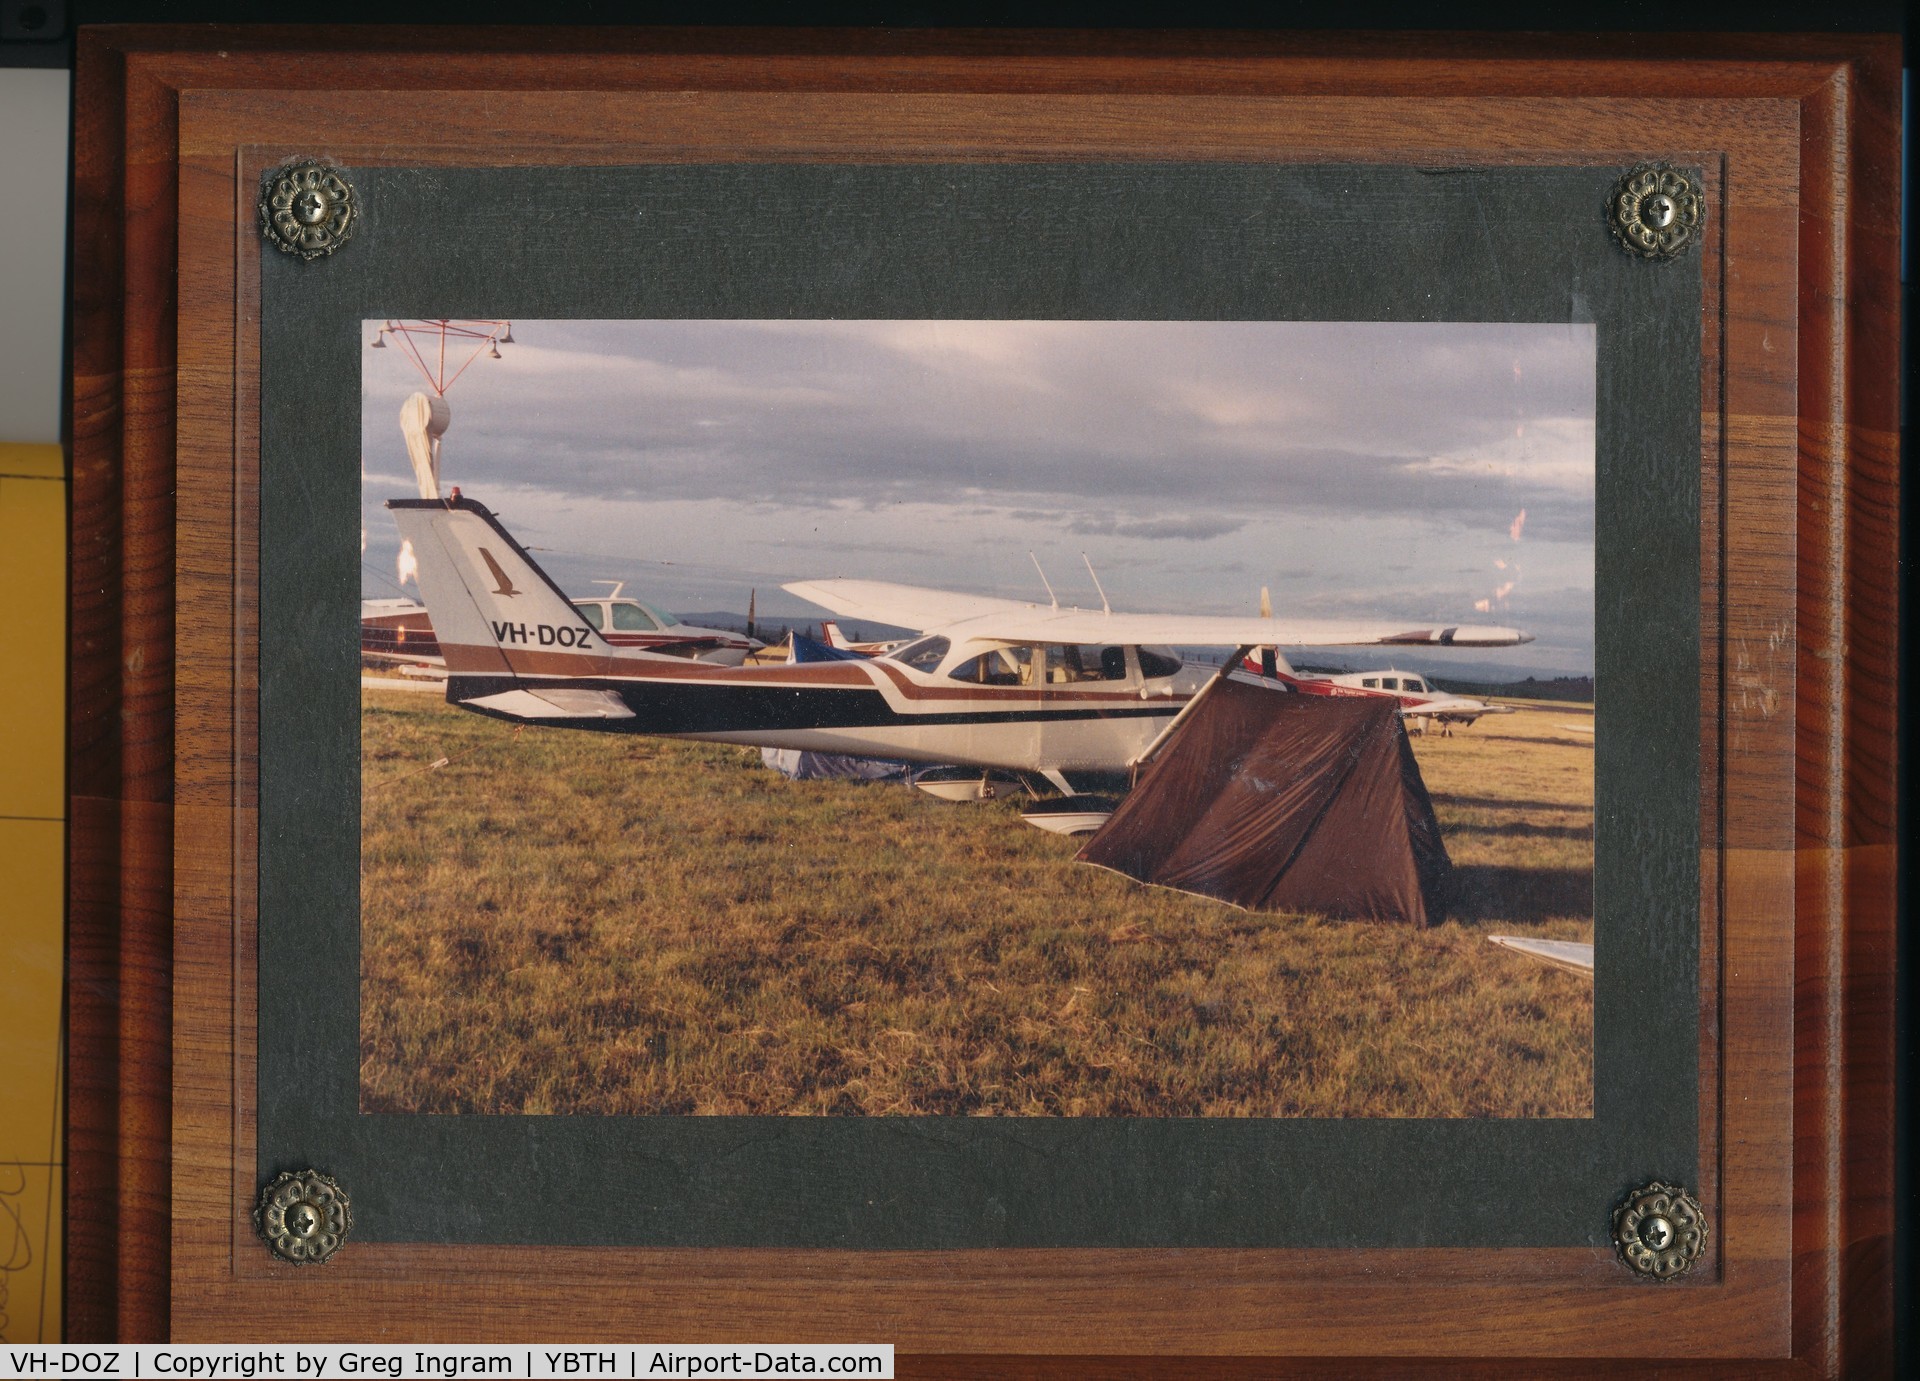 VH-DOZ, 1965 Cessna 172F C/N 17252939, My Aircraft at the time at Bathurst races 1987